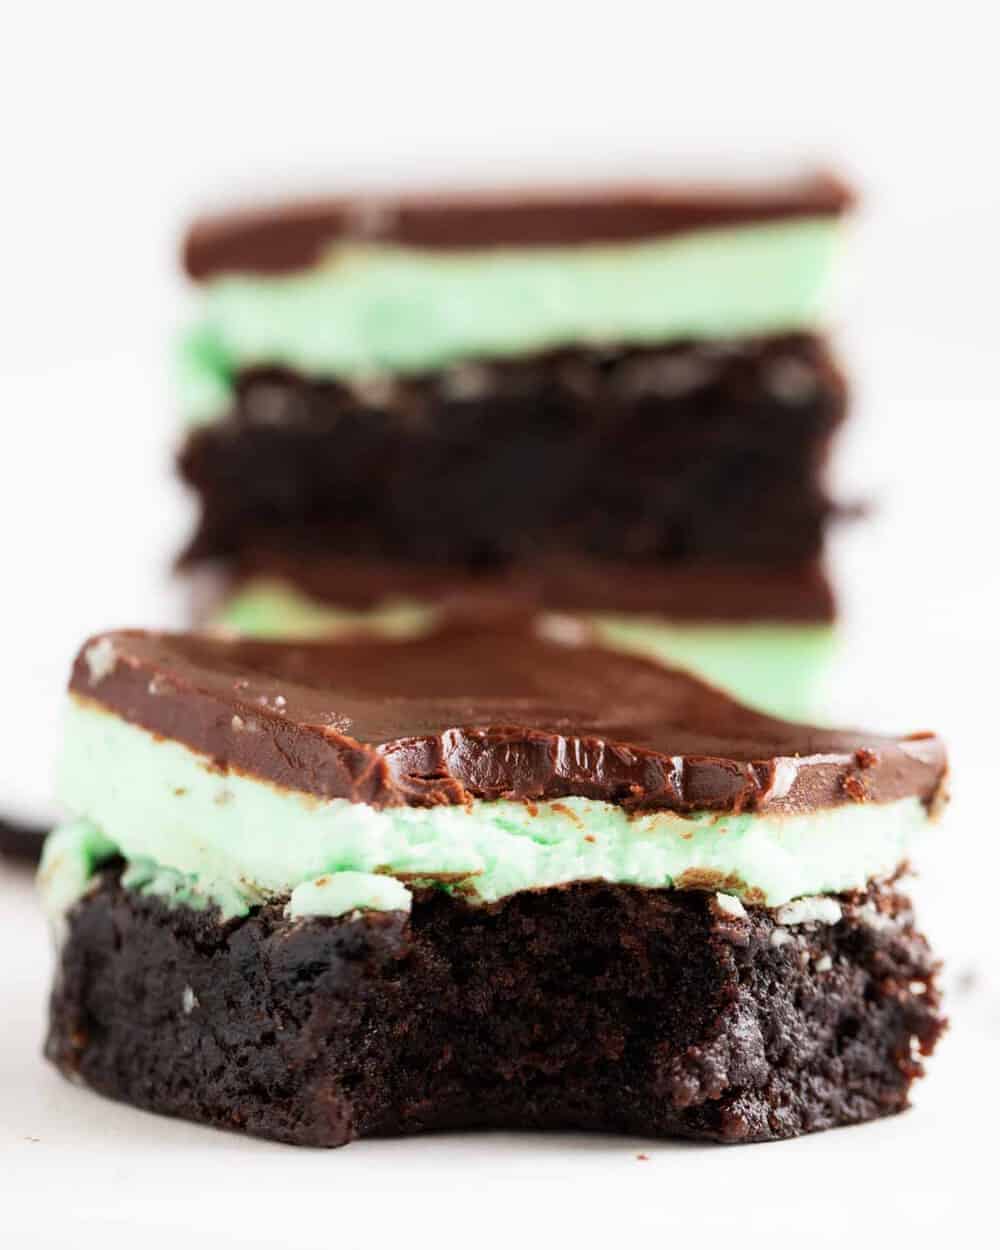 Mint brownies with a bite taken.